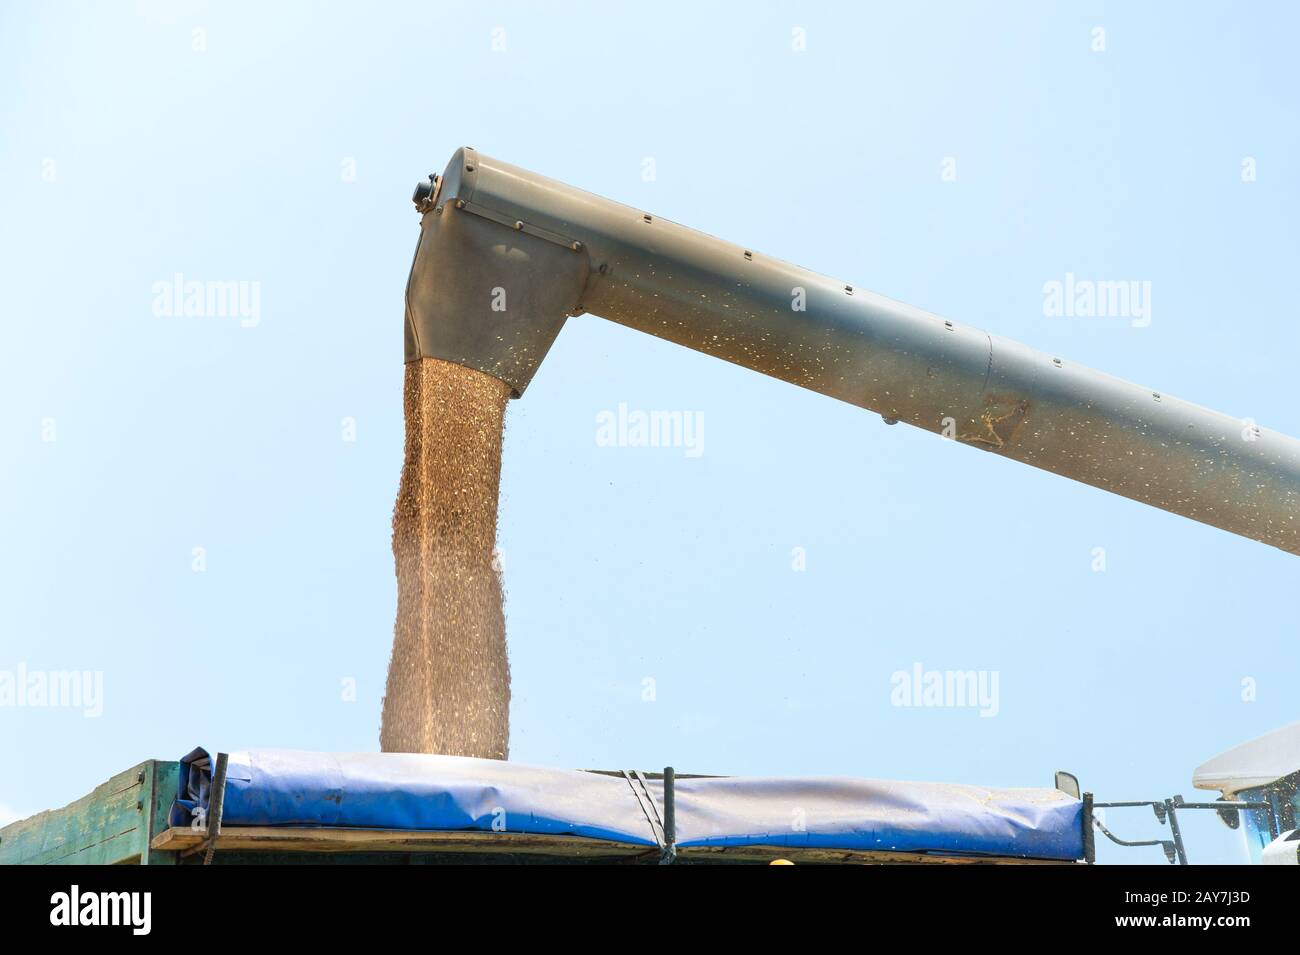 Combine harvester in action on wheat field, unloading grains Stock Photo